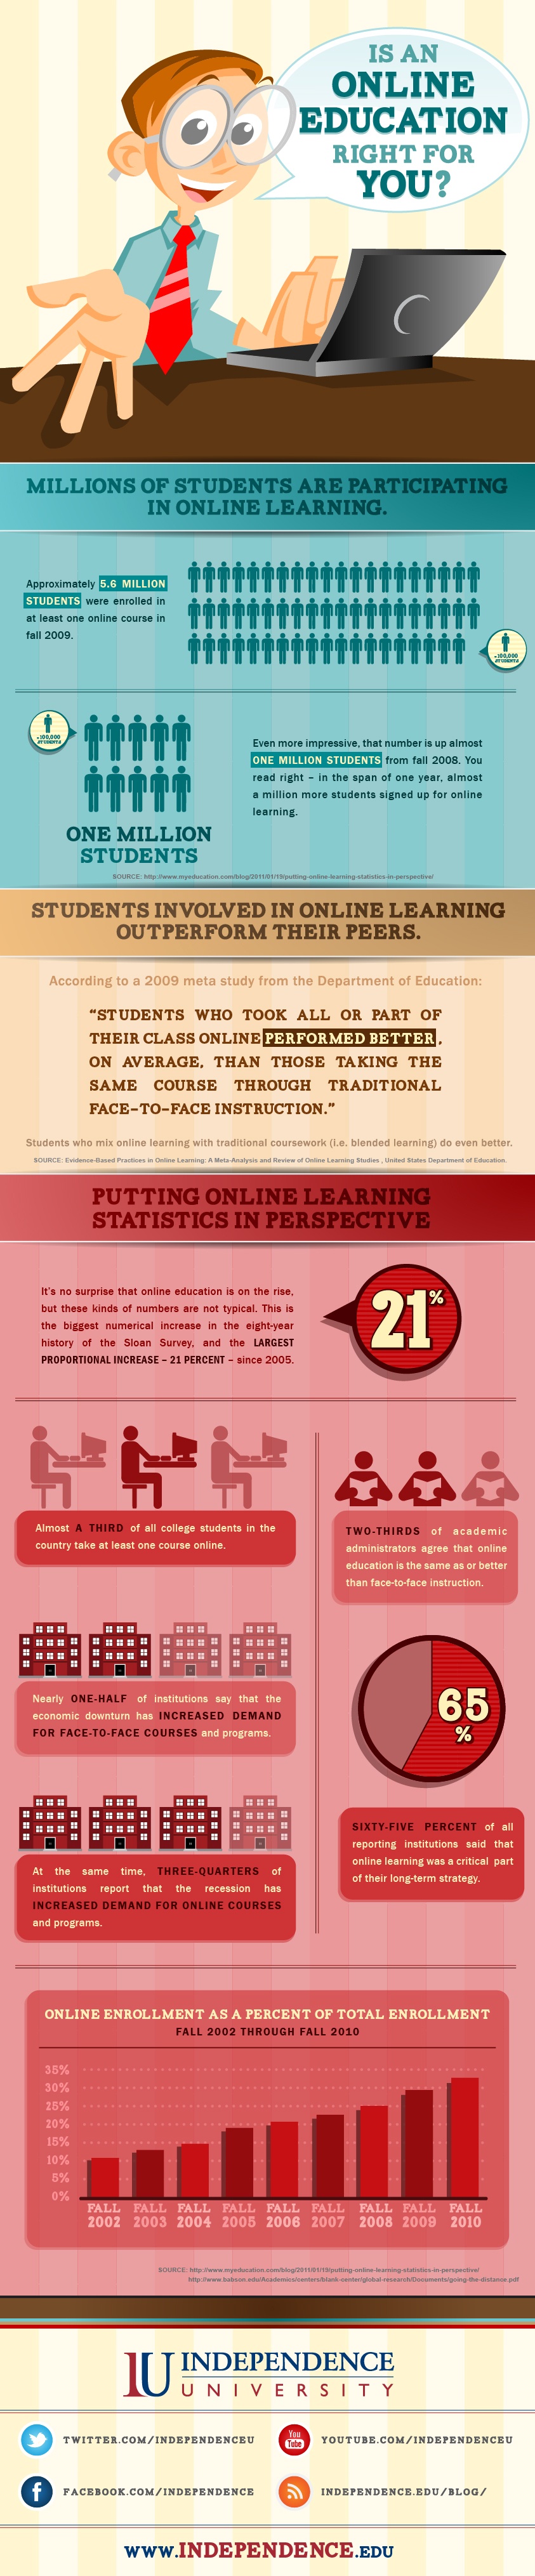 Is Online Education Right for You? Infographic